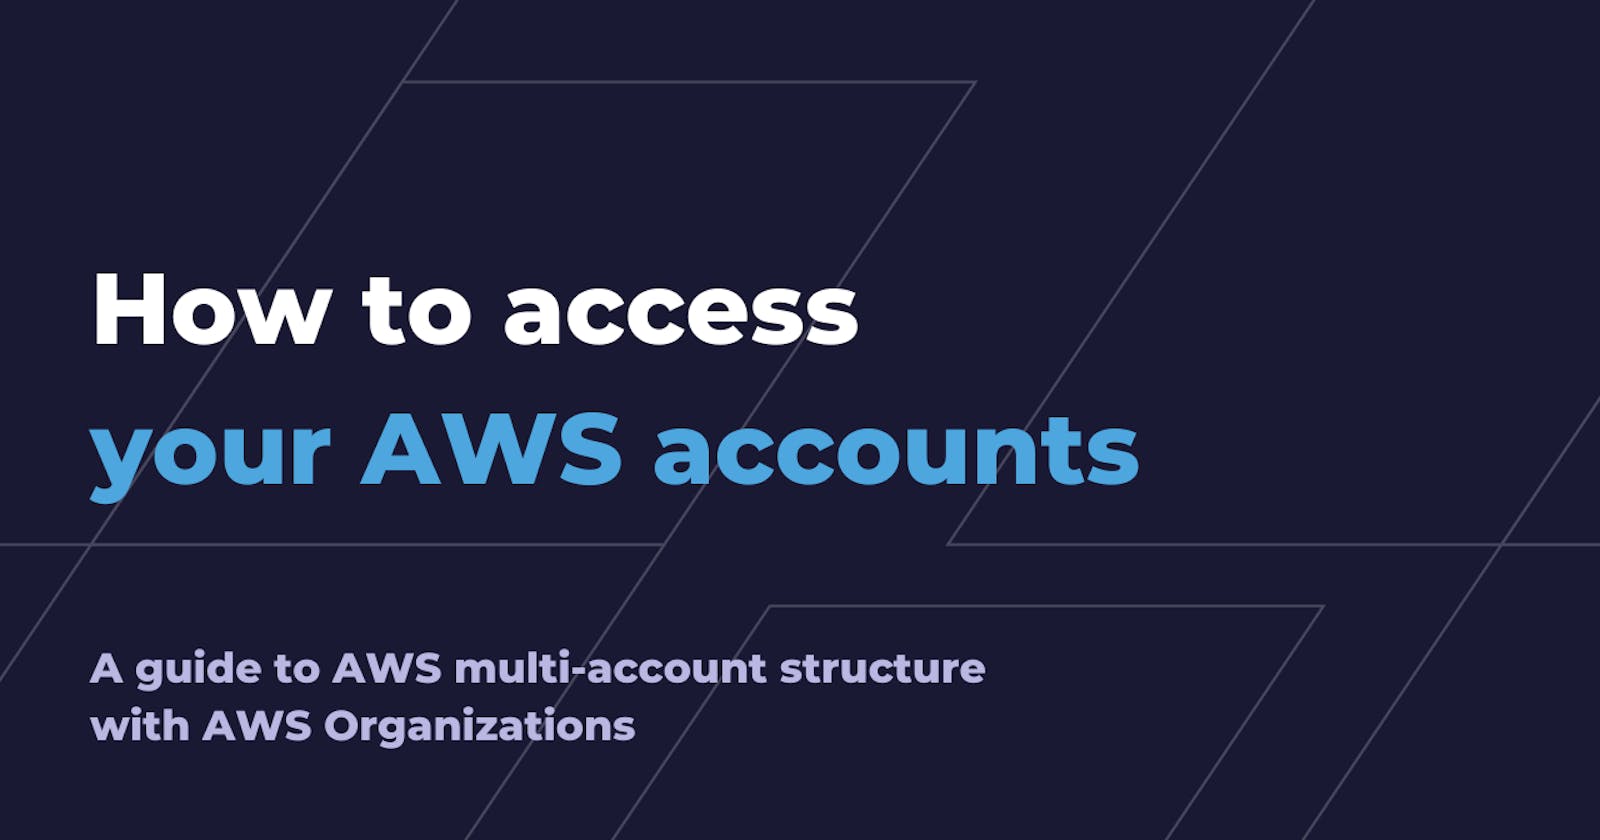 AWS multi-account structure with AWS Organization